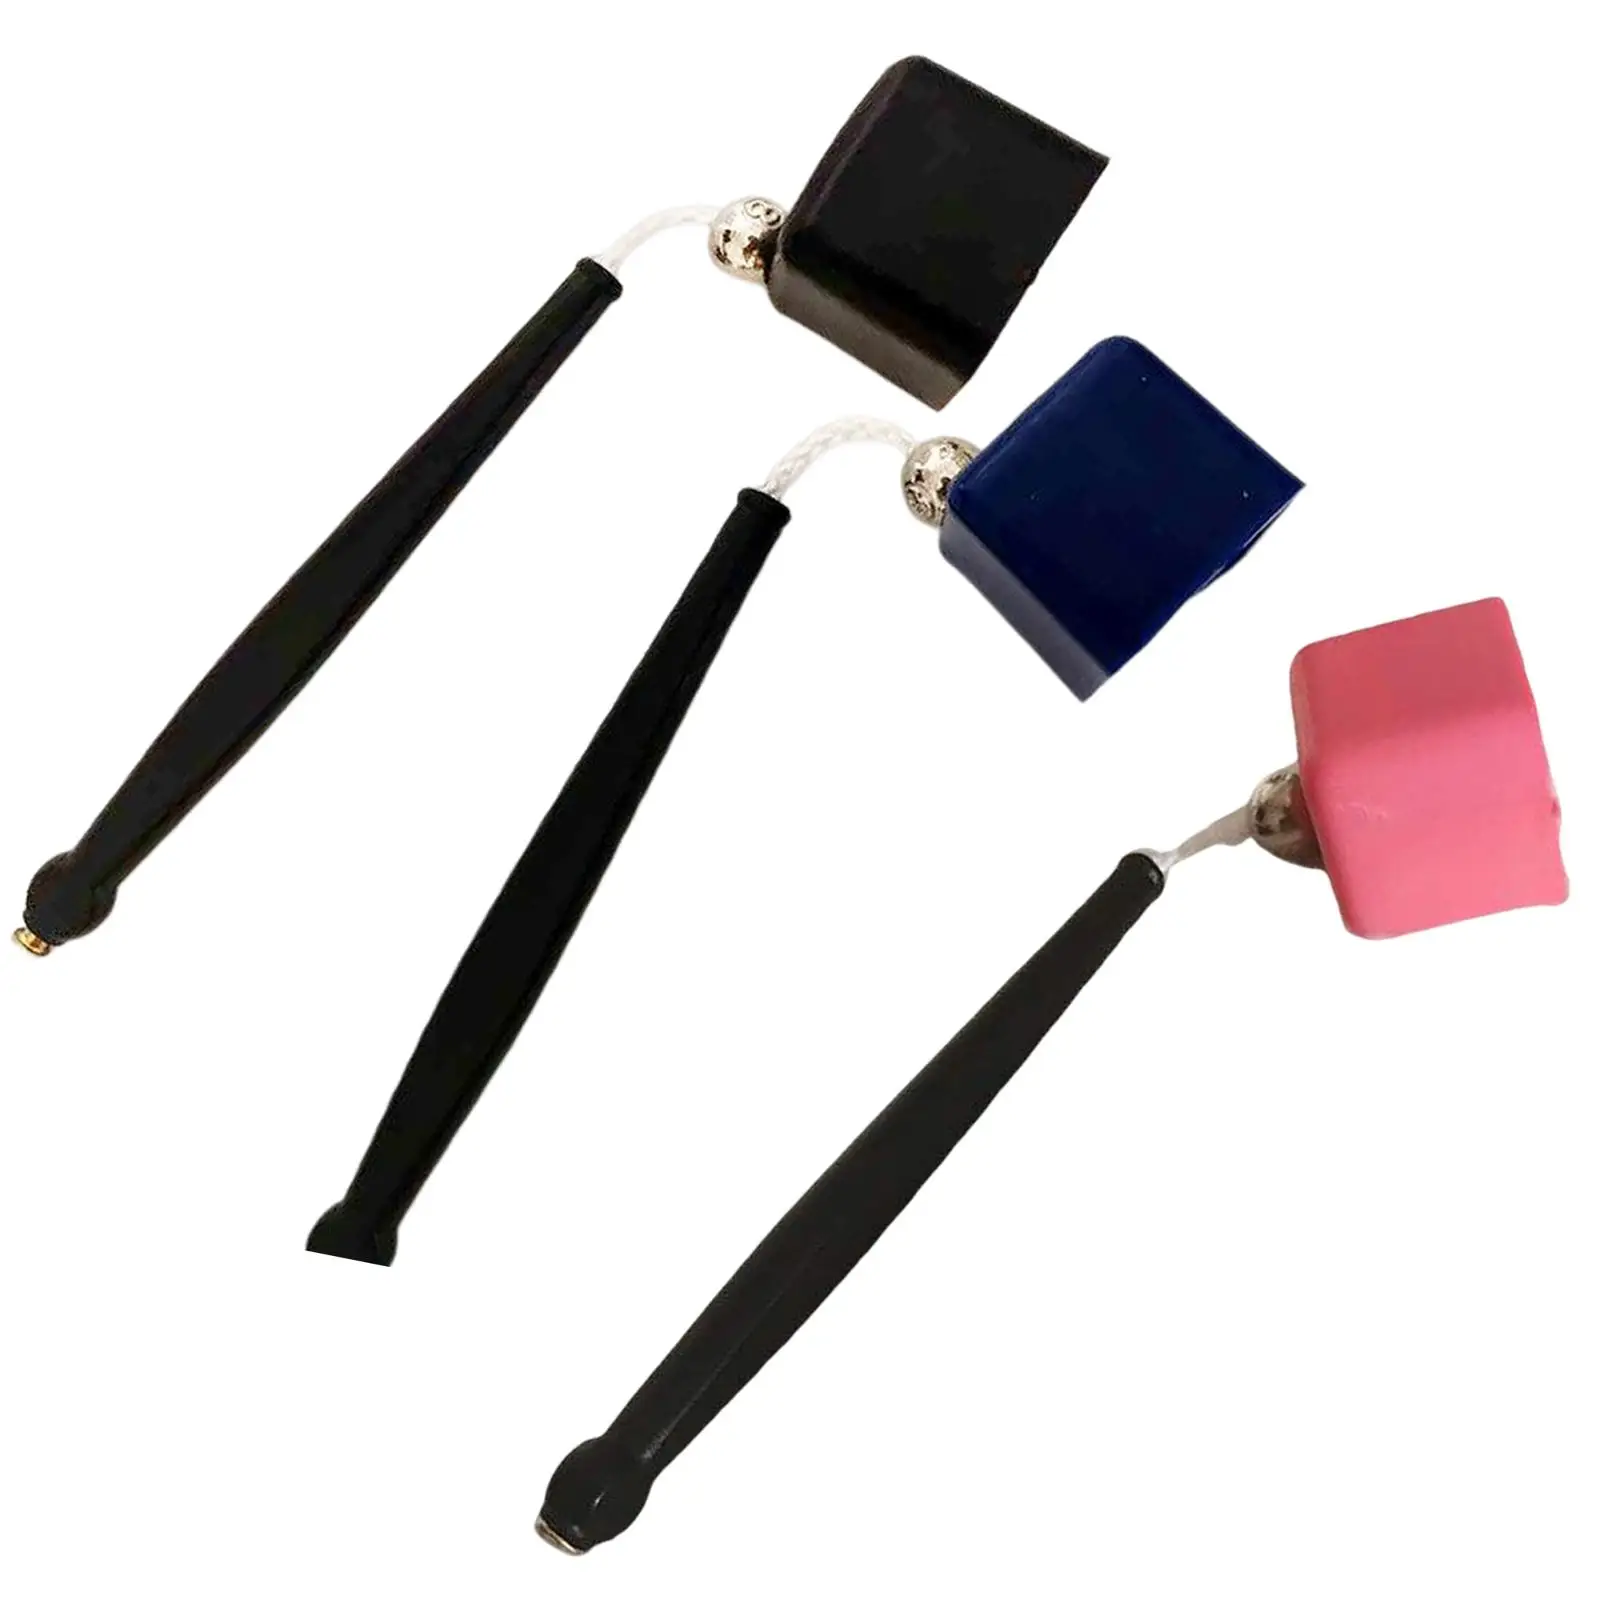 Professional Billiards Pocket Chalkers Holder Easy to Use Cue Chalk Portable